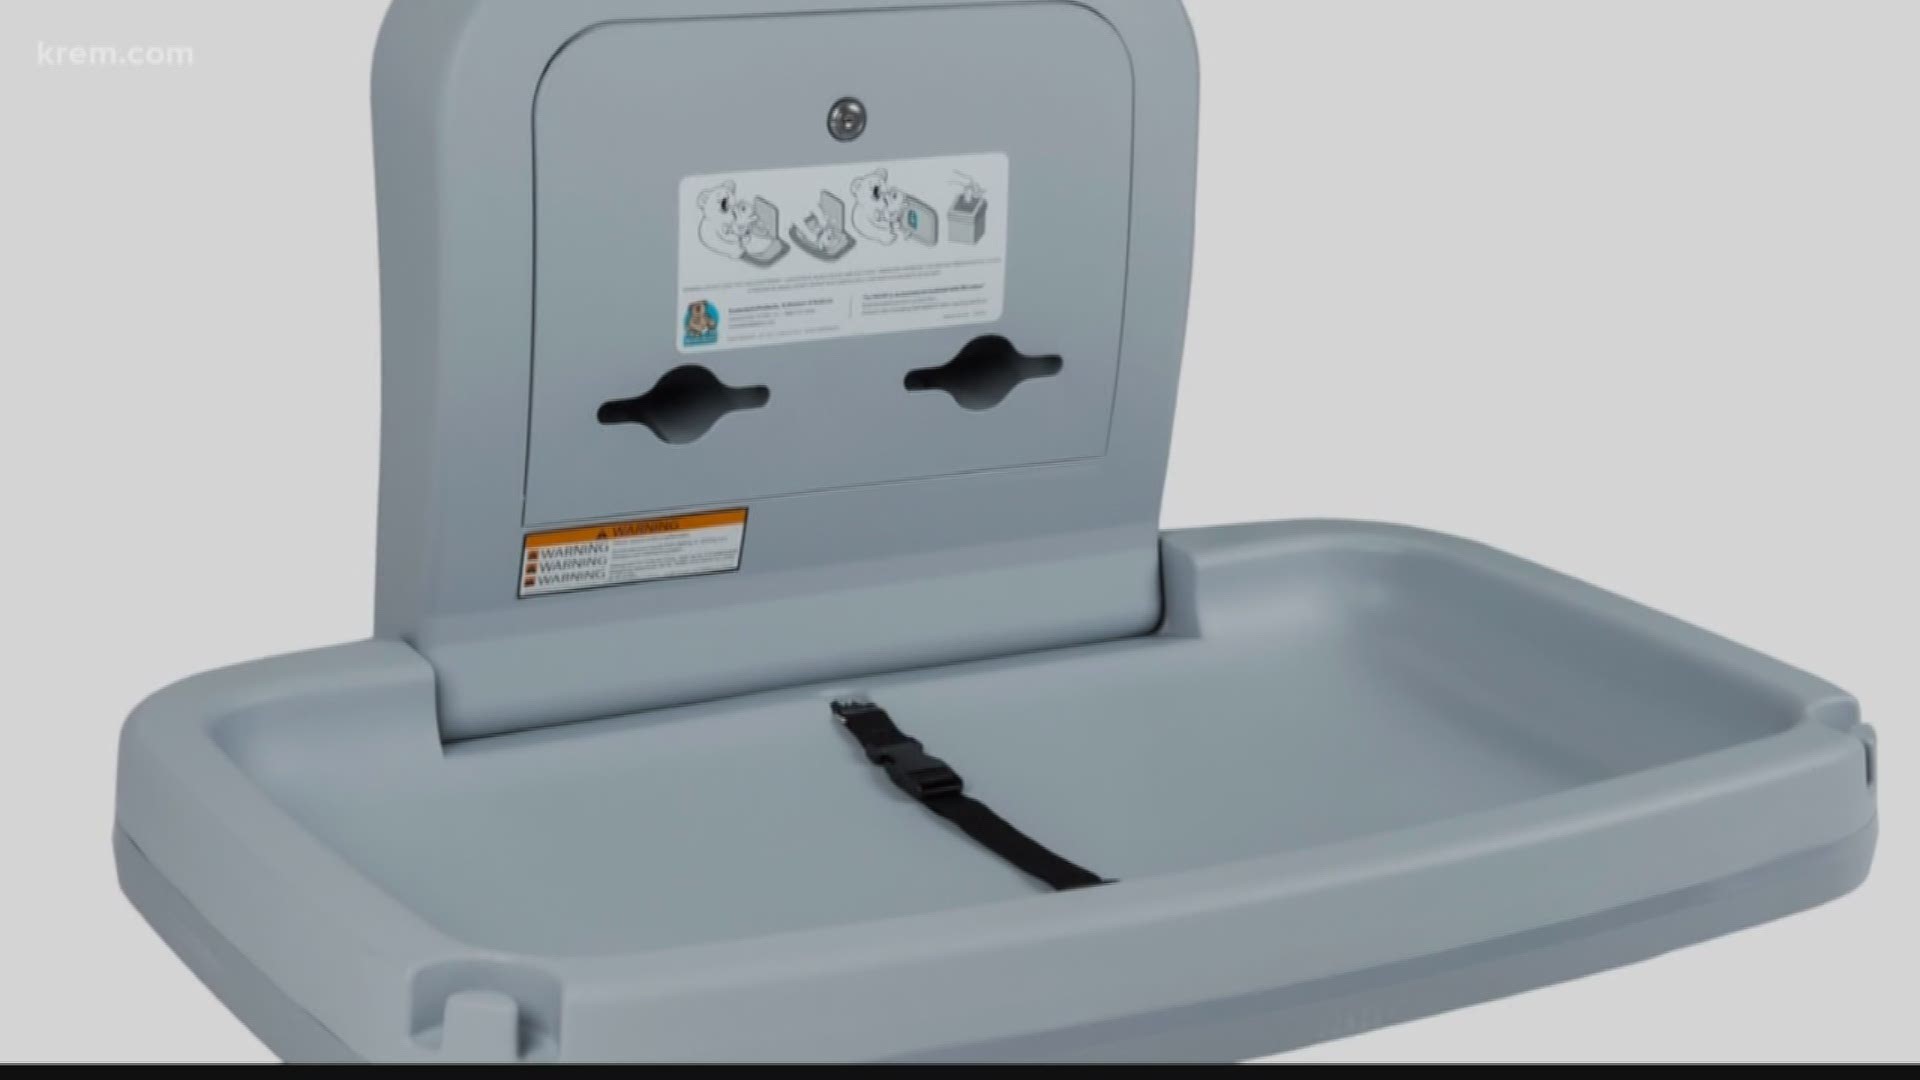 An ordinance passed by the Spokane City Council will install two changing tables in men's and women's restrooms in a new city building each year, starting with City Hall.